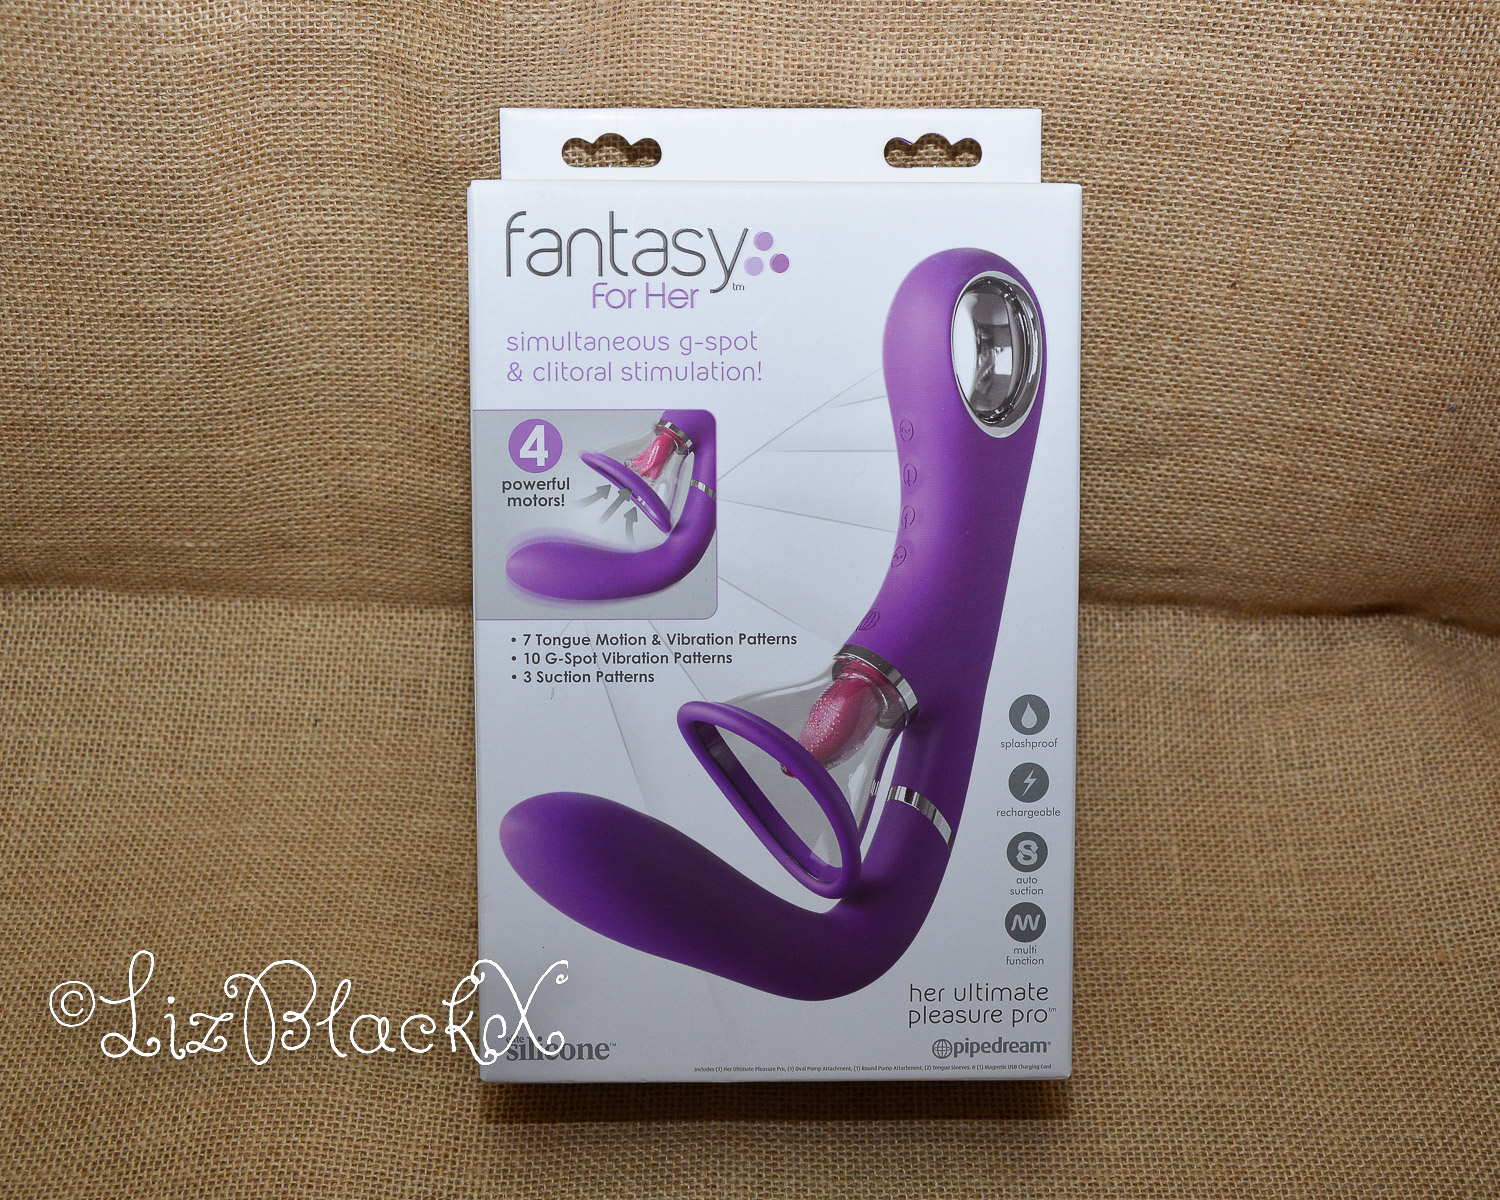 Review of the Her Ultimate Pleasure Pro by Fantasy for Her - Pipedream hq nude picture